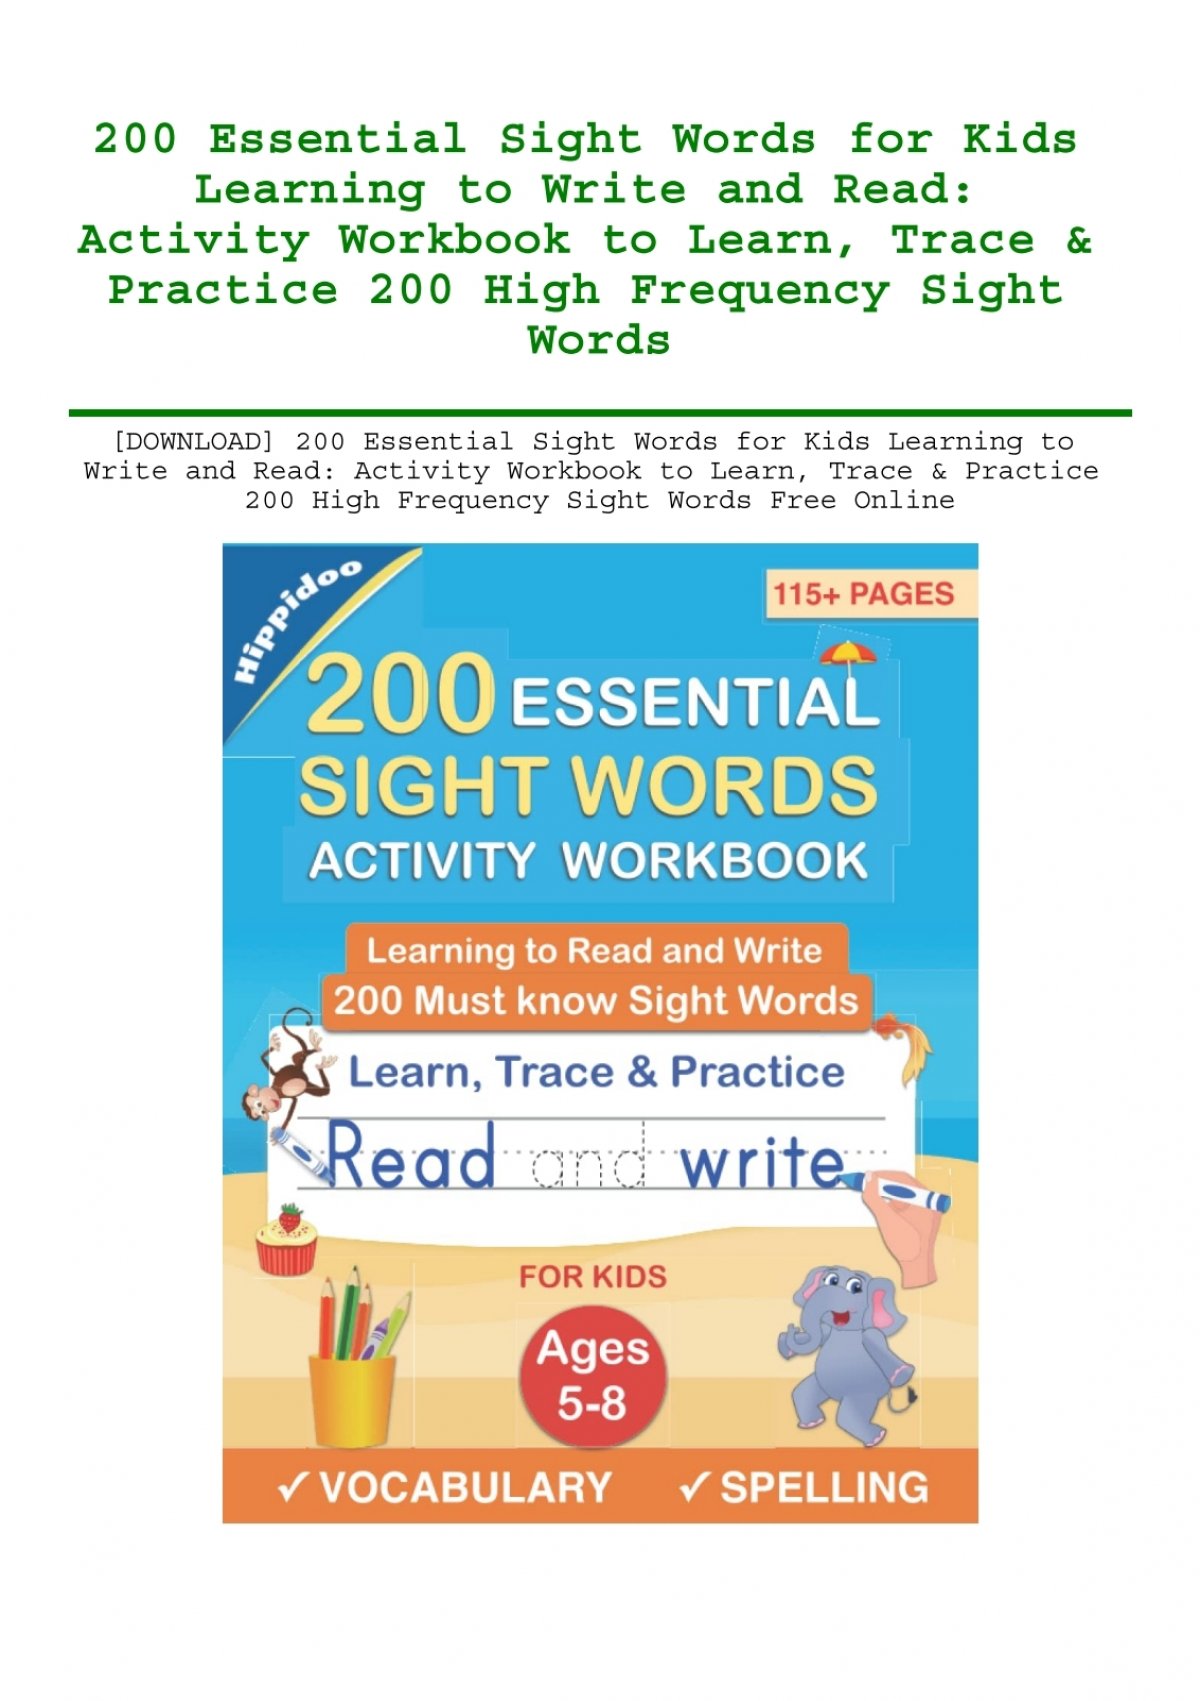 download-200-essential-sight-words-for-kids-learning-to-write-and